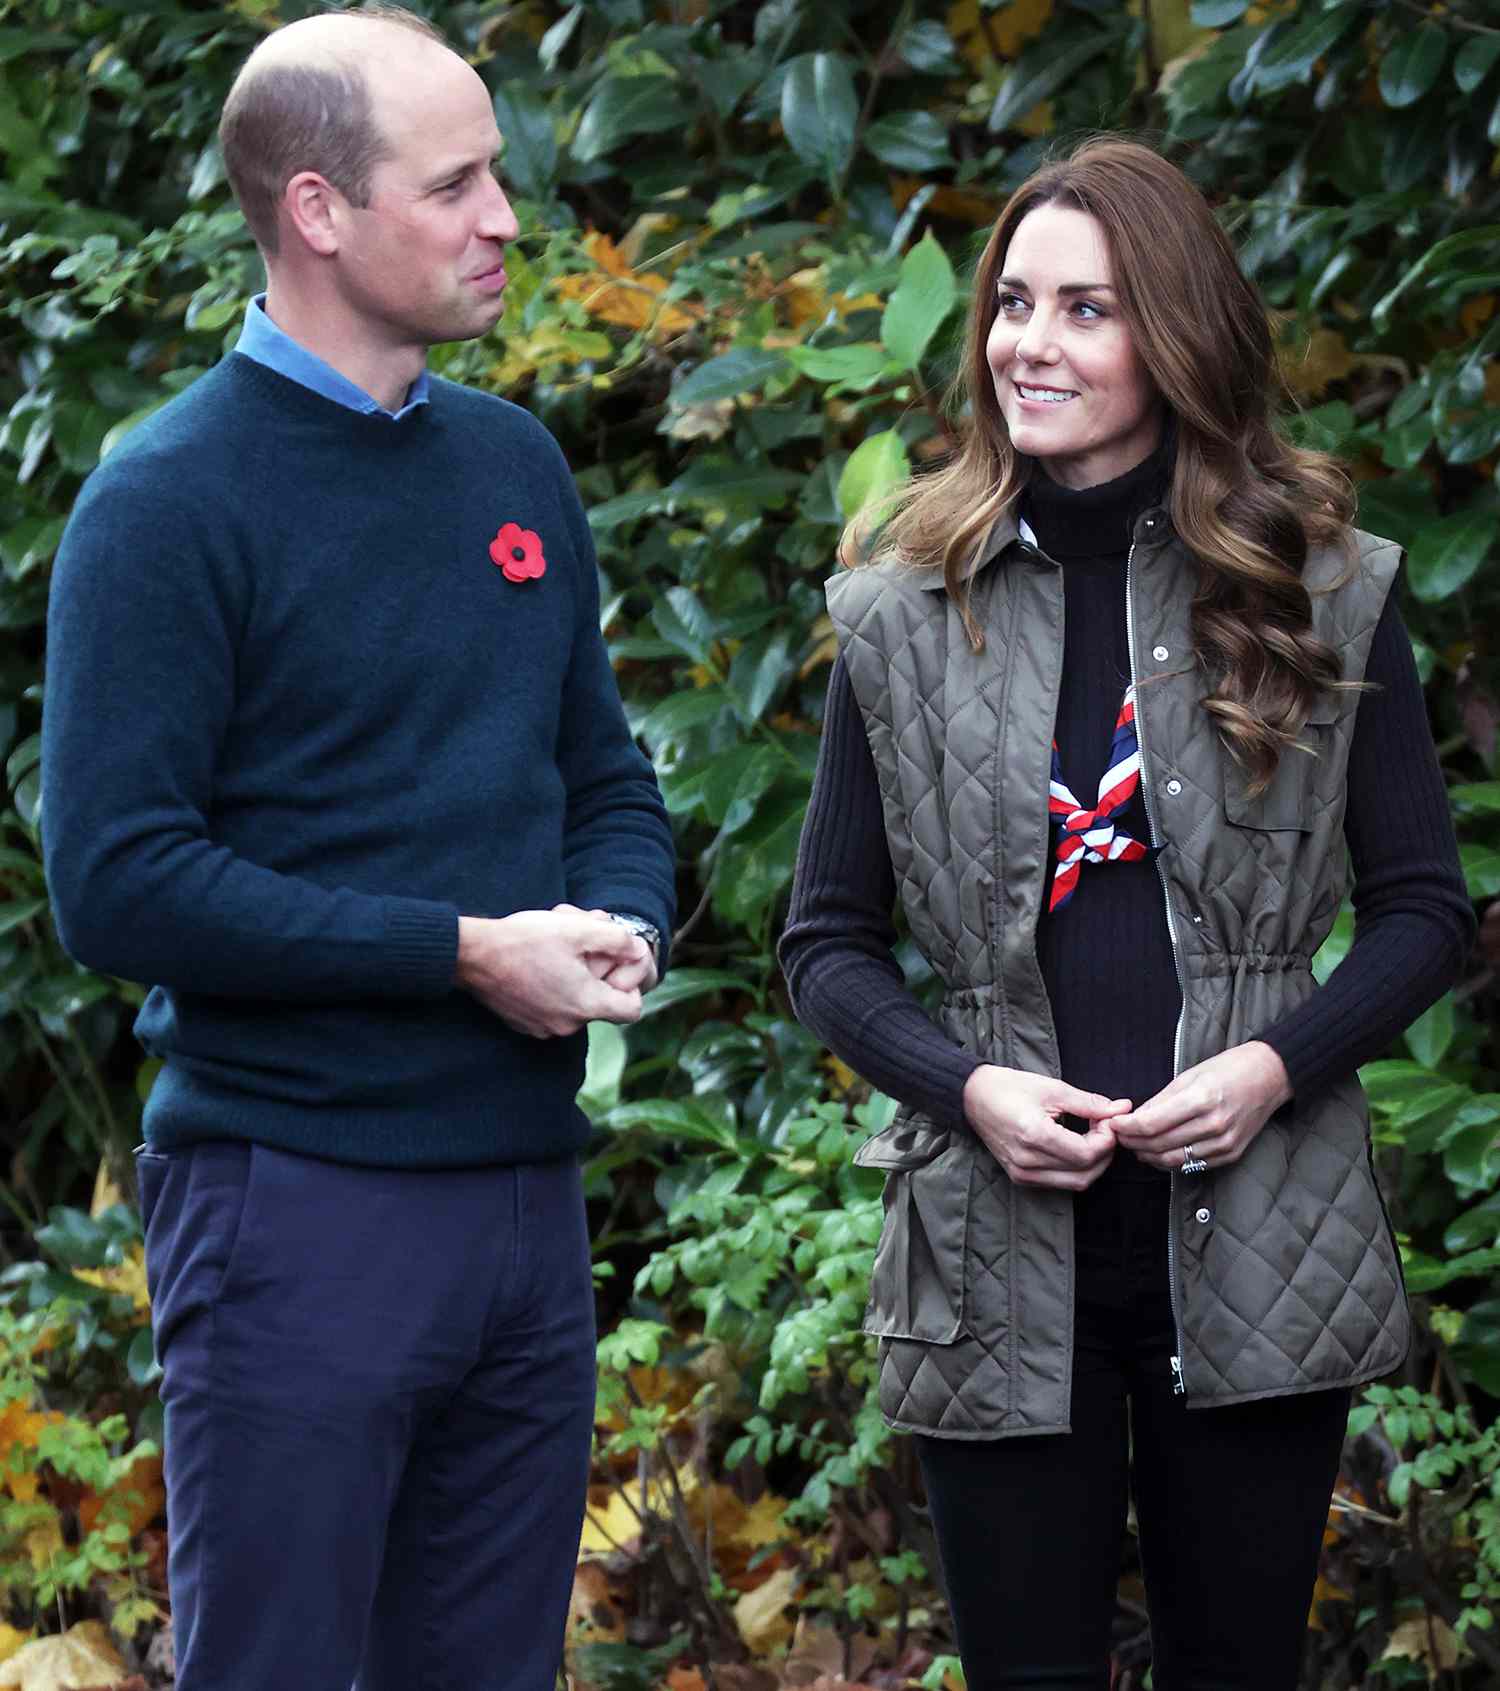 GLASGOW, SCOTLAND - NOVEMBER 01: Prince William, Duke of Cambridge and Catherine, Duchess of Cambridge during a visit to Alexandra Park Sports Hub on day two of COP26 on November 01, 2021 in Glasgow, Scotland. 2021 sees the 26th United Nations Climate Change Conference which will run from 31 October for two weeks, finishing on 12 November. It was meant to take place in 2020 but was delayed due to the Covid-19 pandemic. (Photo by Chris Jackson/Getty Images)